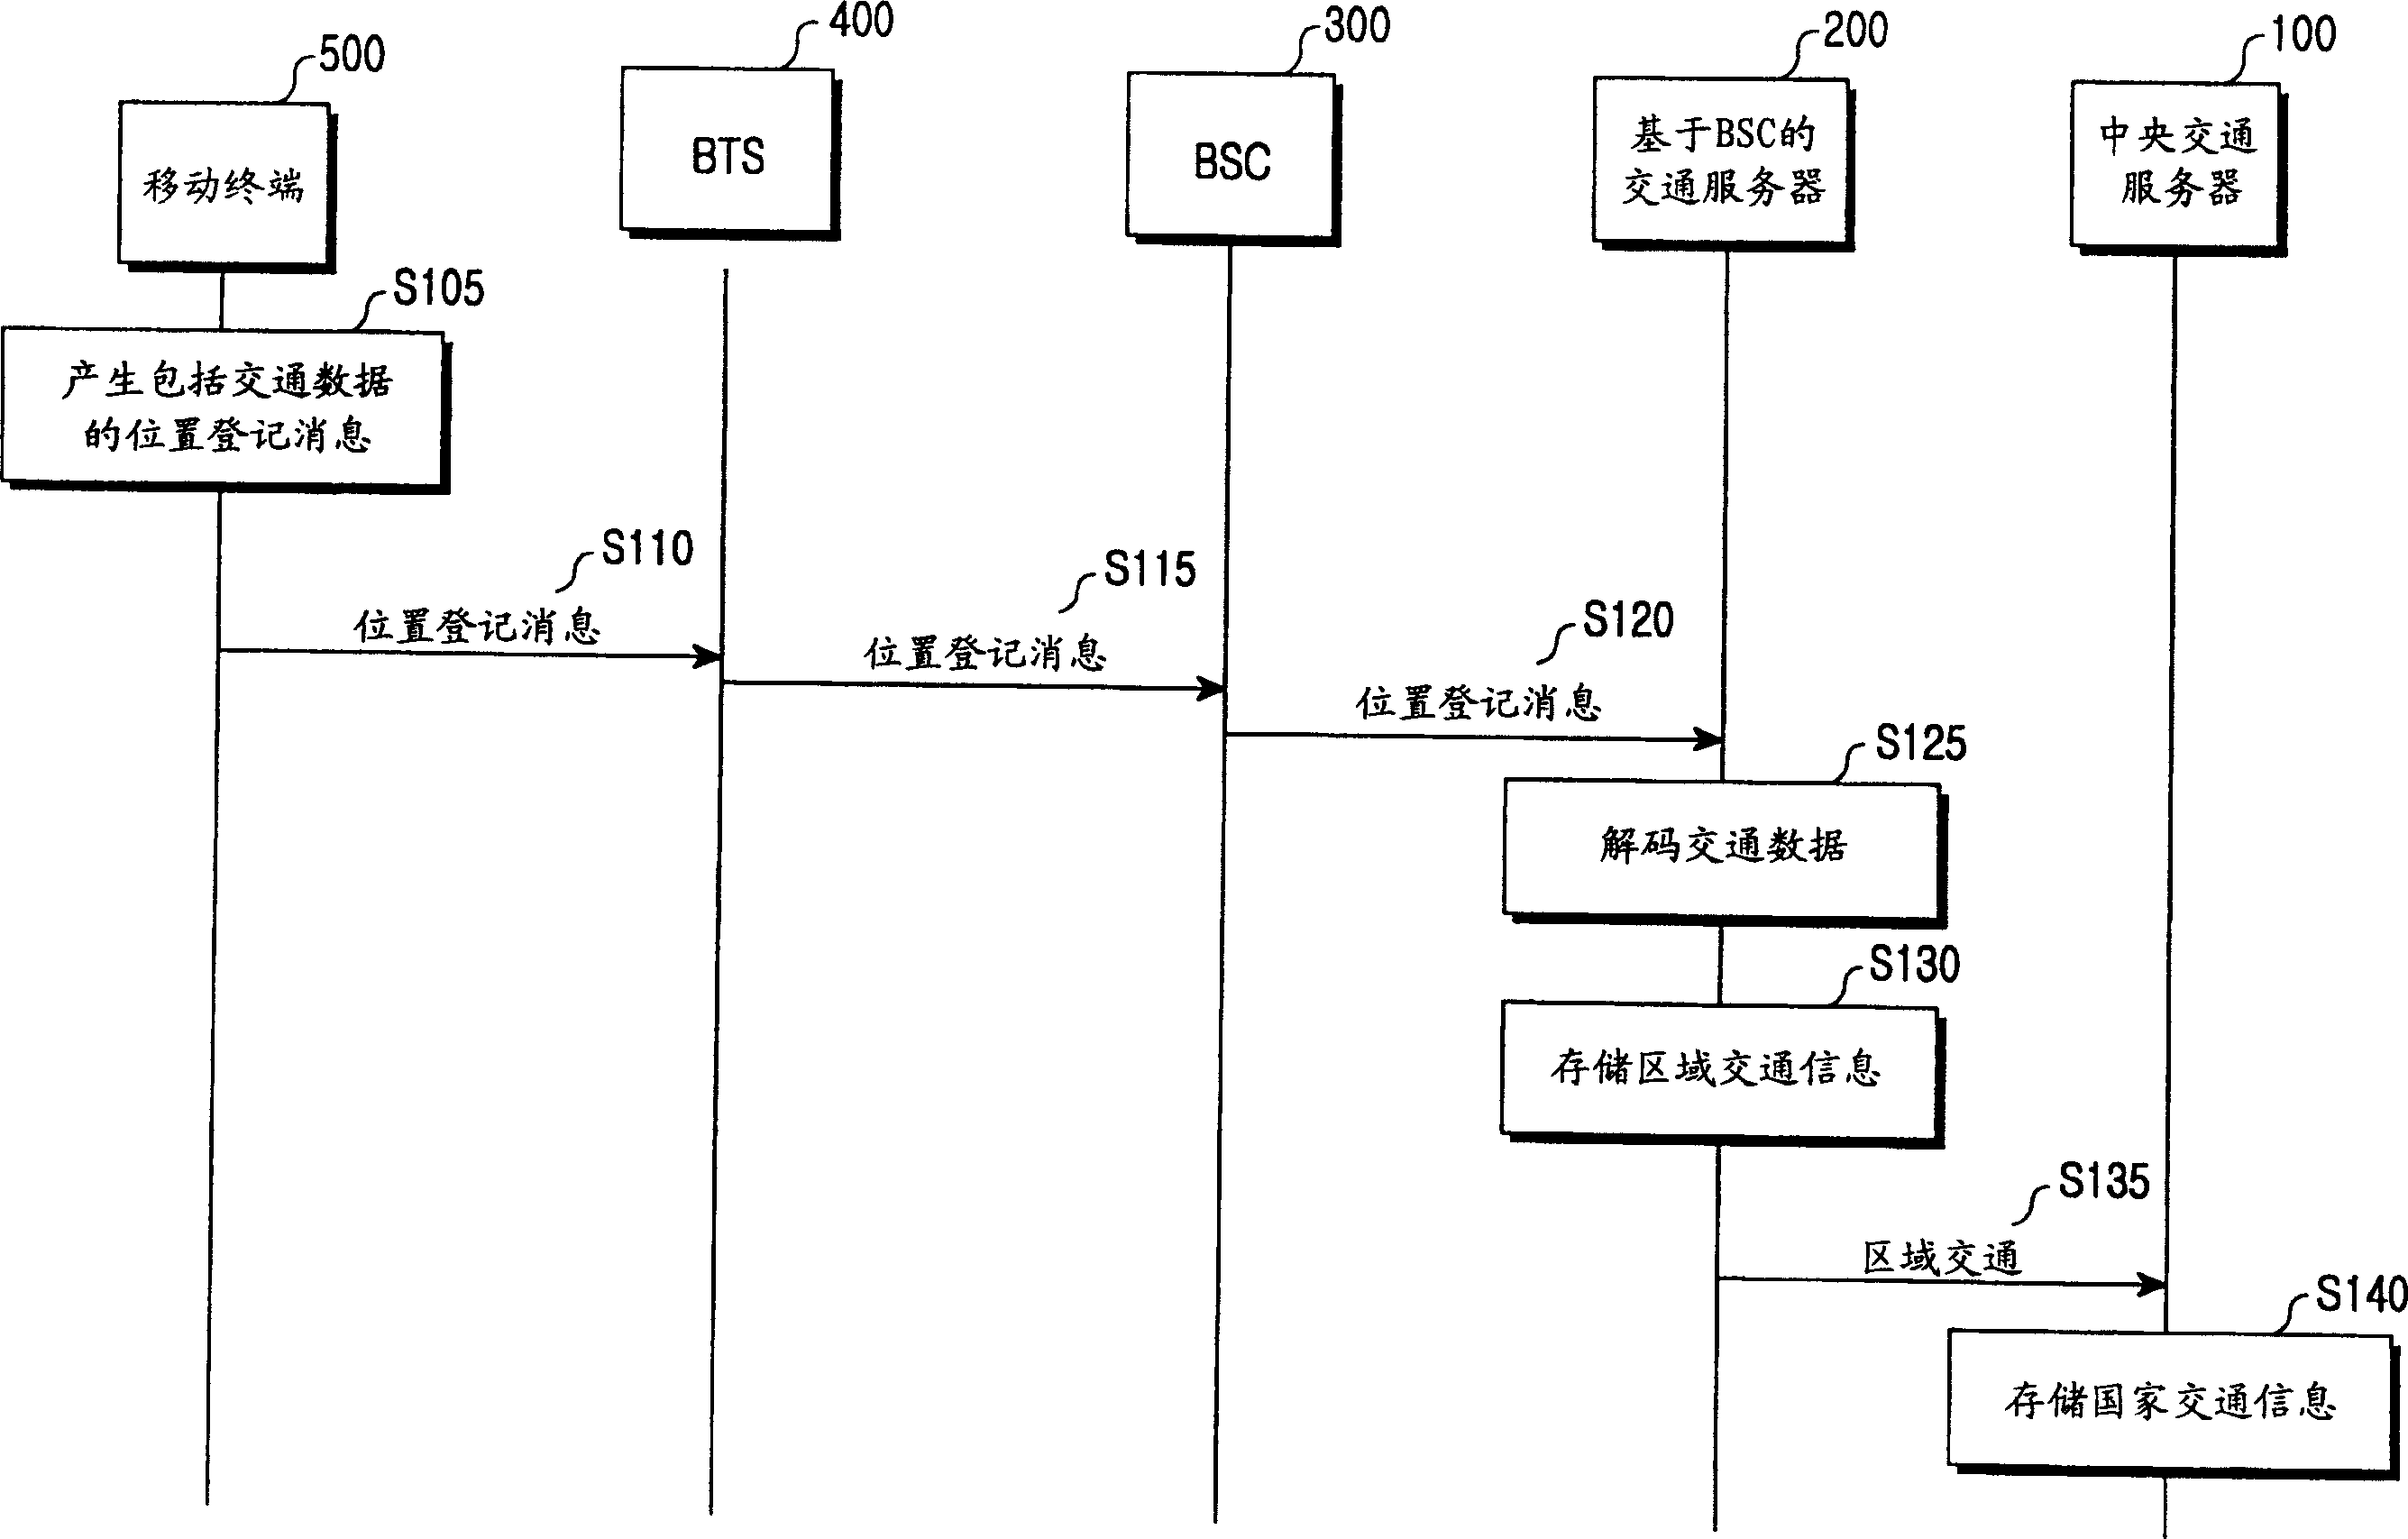 Method and apparatus for collecting traffic data in real time